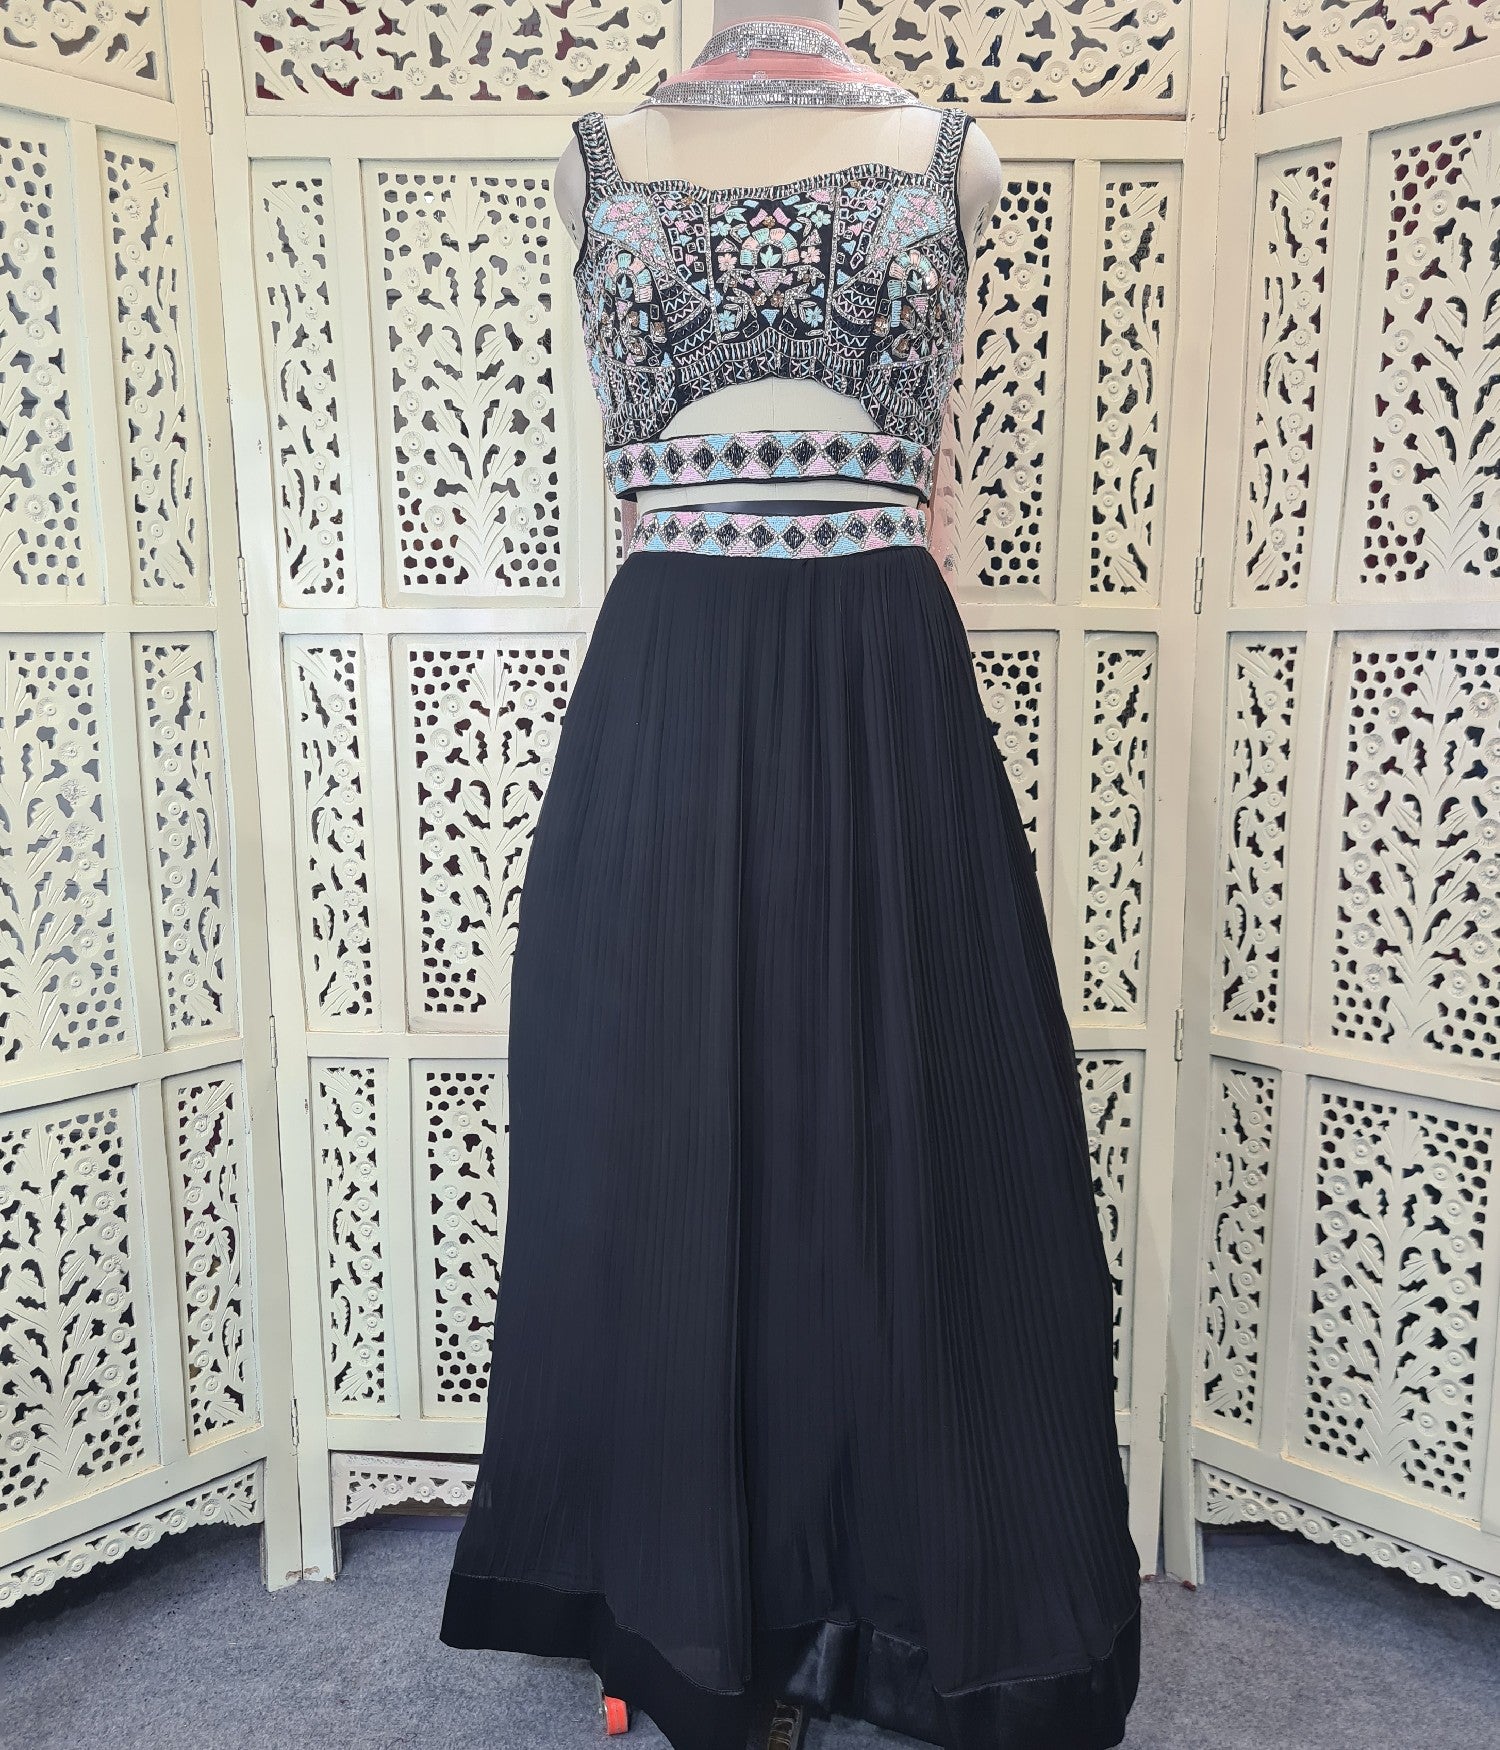 Beautiful Lehenga Choli in Black-spendworthclothing-Color_Black,Easy-Returns,Free-Shipping,Indo-Western-Lehengas,Item Type_Indo Western Lehenga,Item Type_Light Weight Lehenga,LEHENGA-SETS,Light-Weight-Lehenga,Material_Georgette,Size_Large,Size_Medium,Size_Small,Size_XL,Speedy-Deliveries